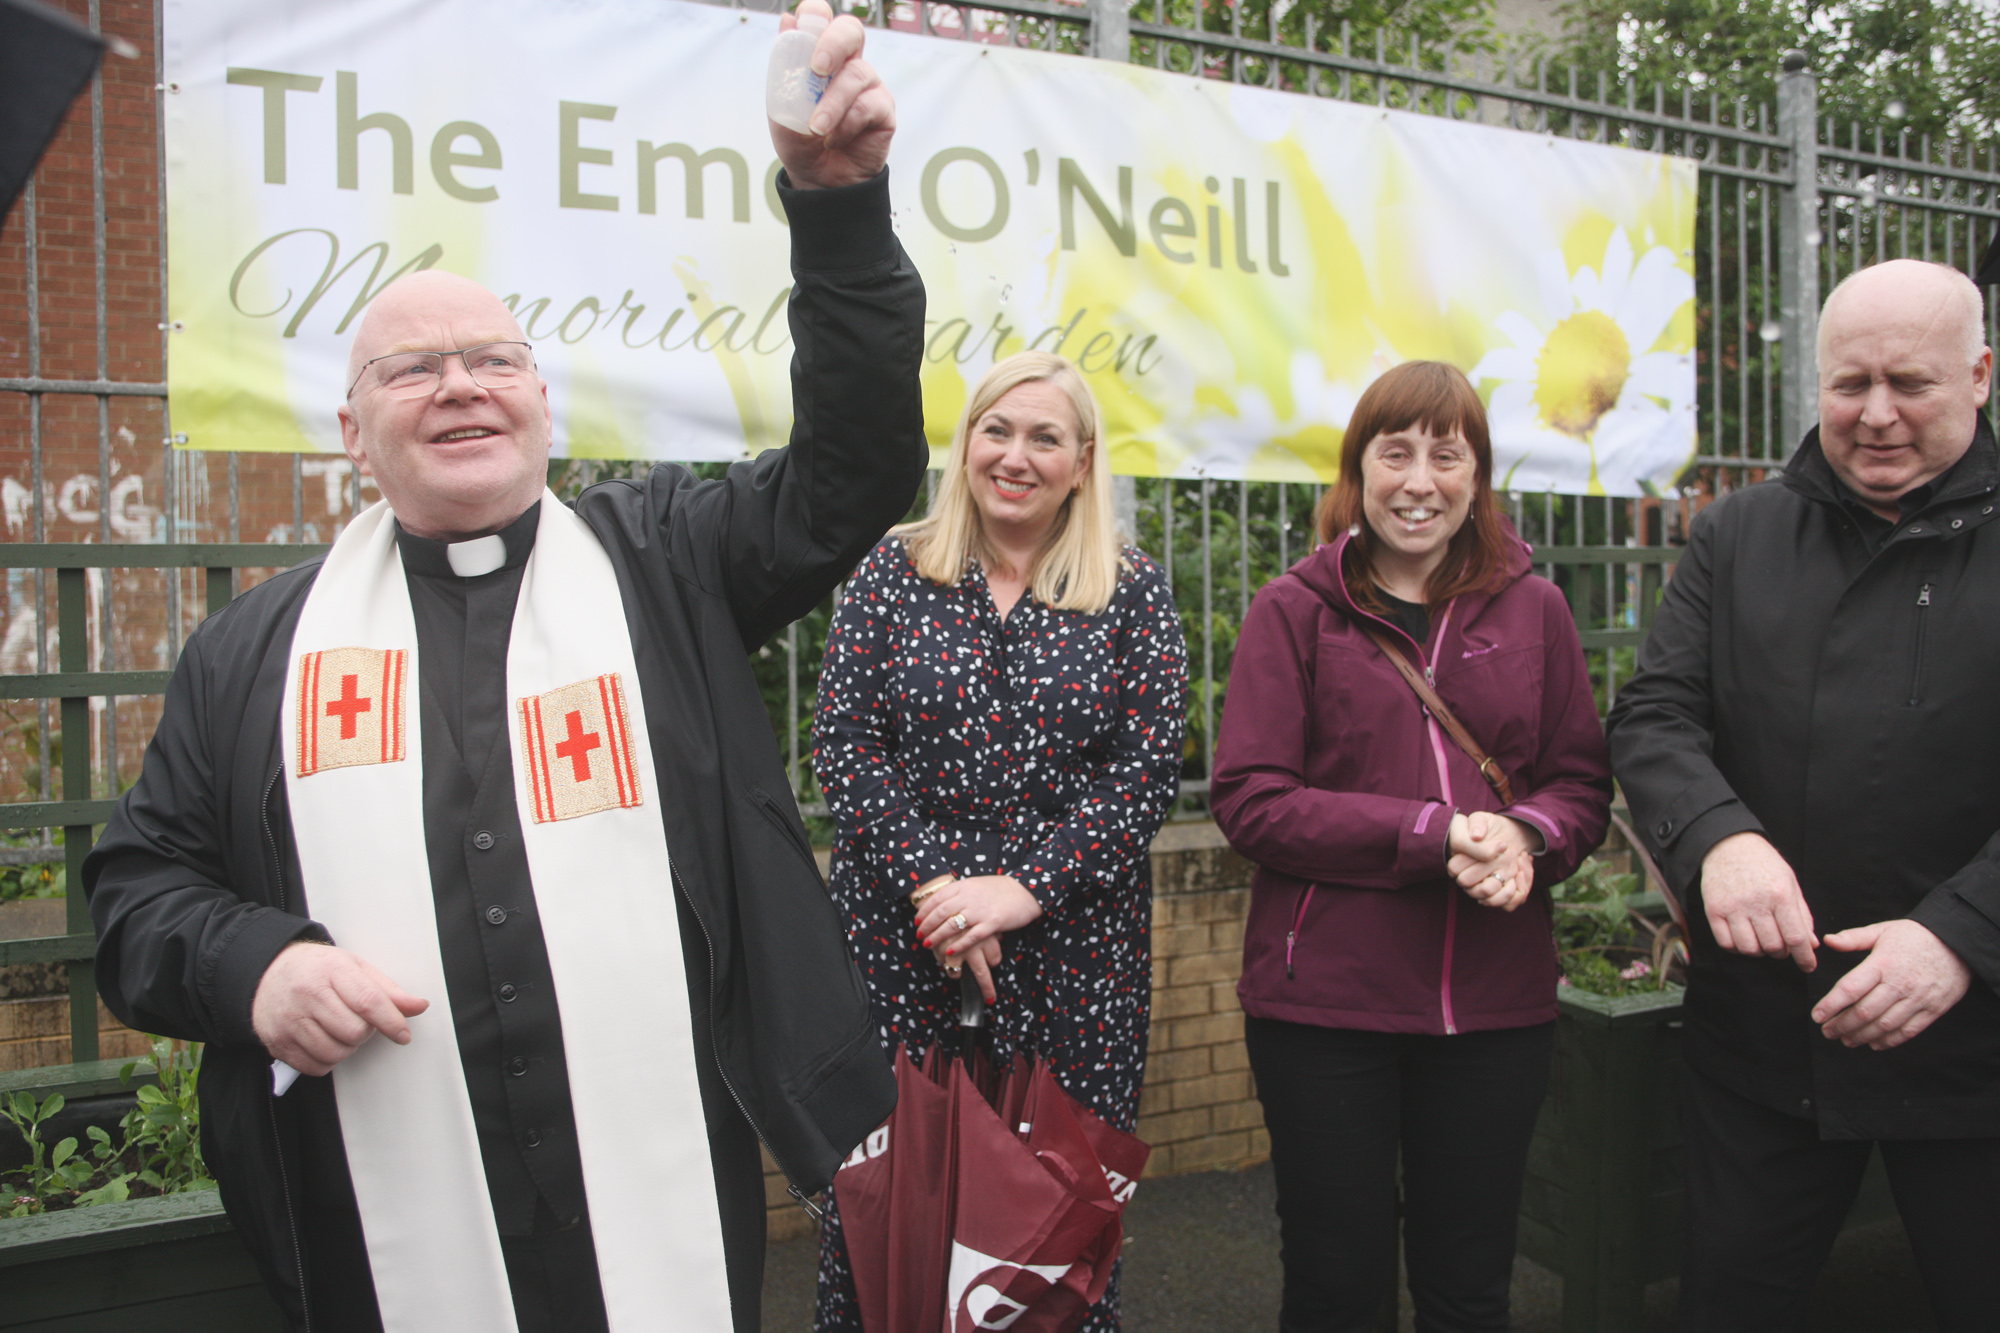 IN MEMORY: Fr Devlin blesses the new memorial garden in St Clare\'s Primary School, which is dedicated to the school\'s late caretaker Emer O\'Neill